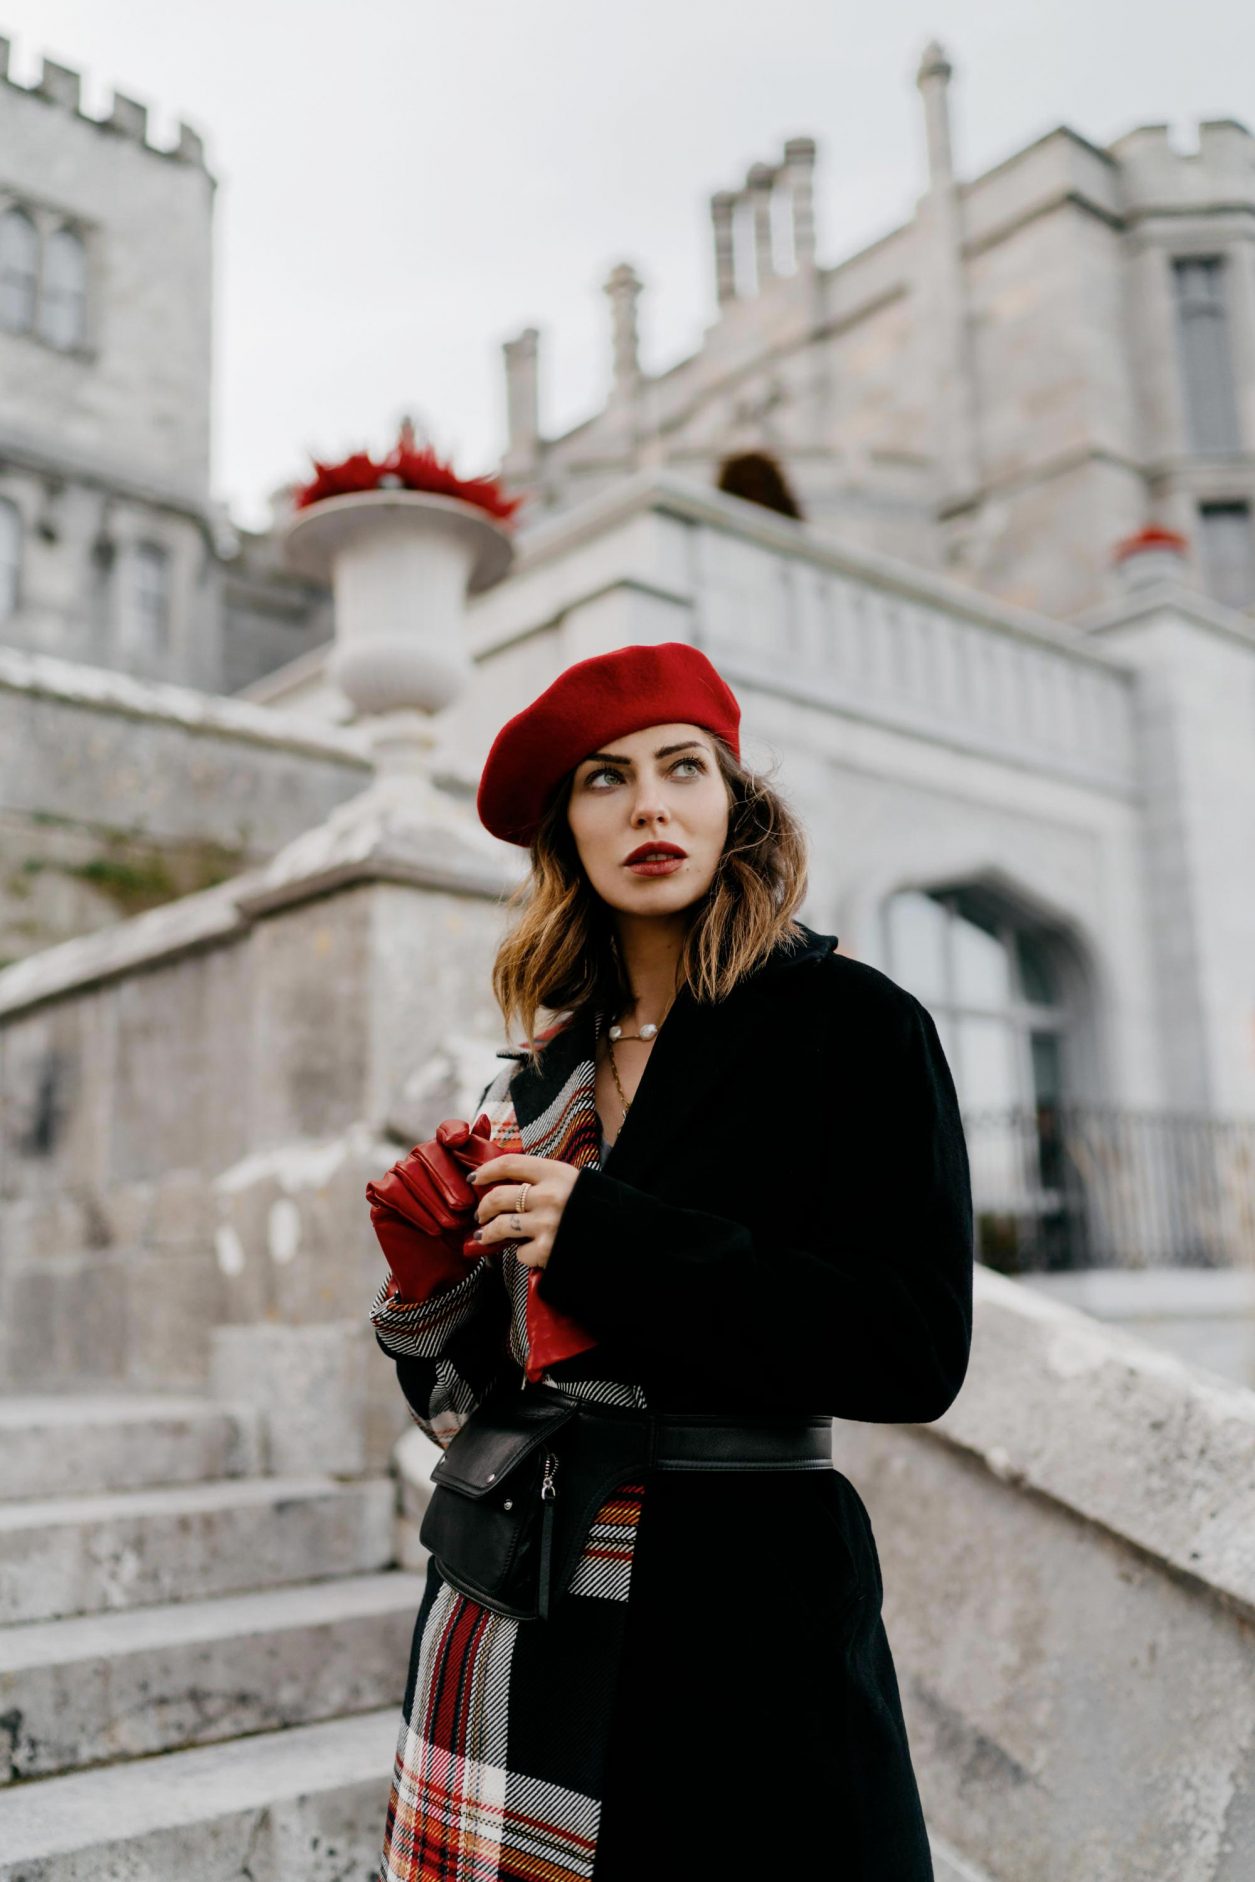 Streetstyle by Masha Sedgwick | Fashion and beauty blogger from Berlin, Germany | Everyday fashion, fall winter 2019 outfit ideas, fashion inspiration, styling tip: checked red with blue, minimalistic chic Parisienne, effortless cool, top autumn outfit | Travel outfit, Scandinavian architecture, Ader Manor Hotel